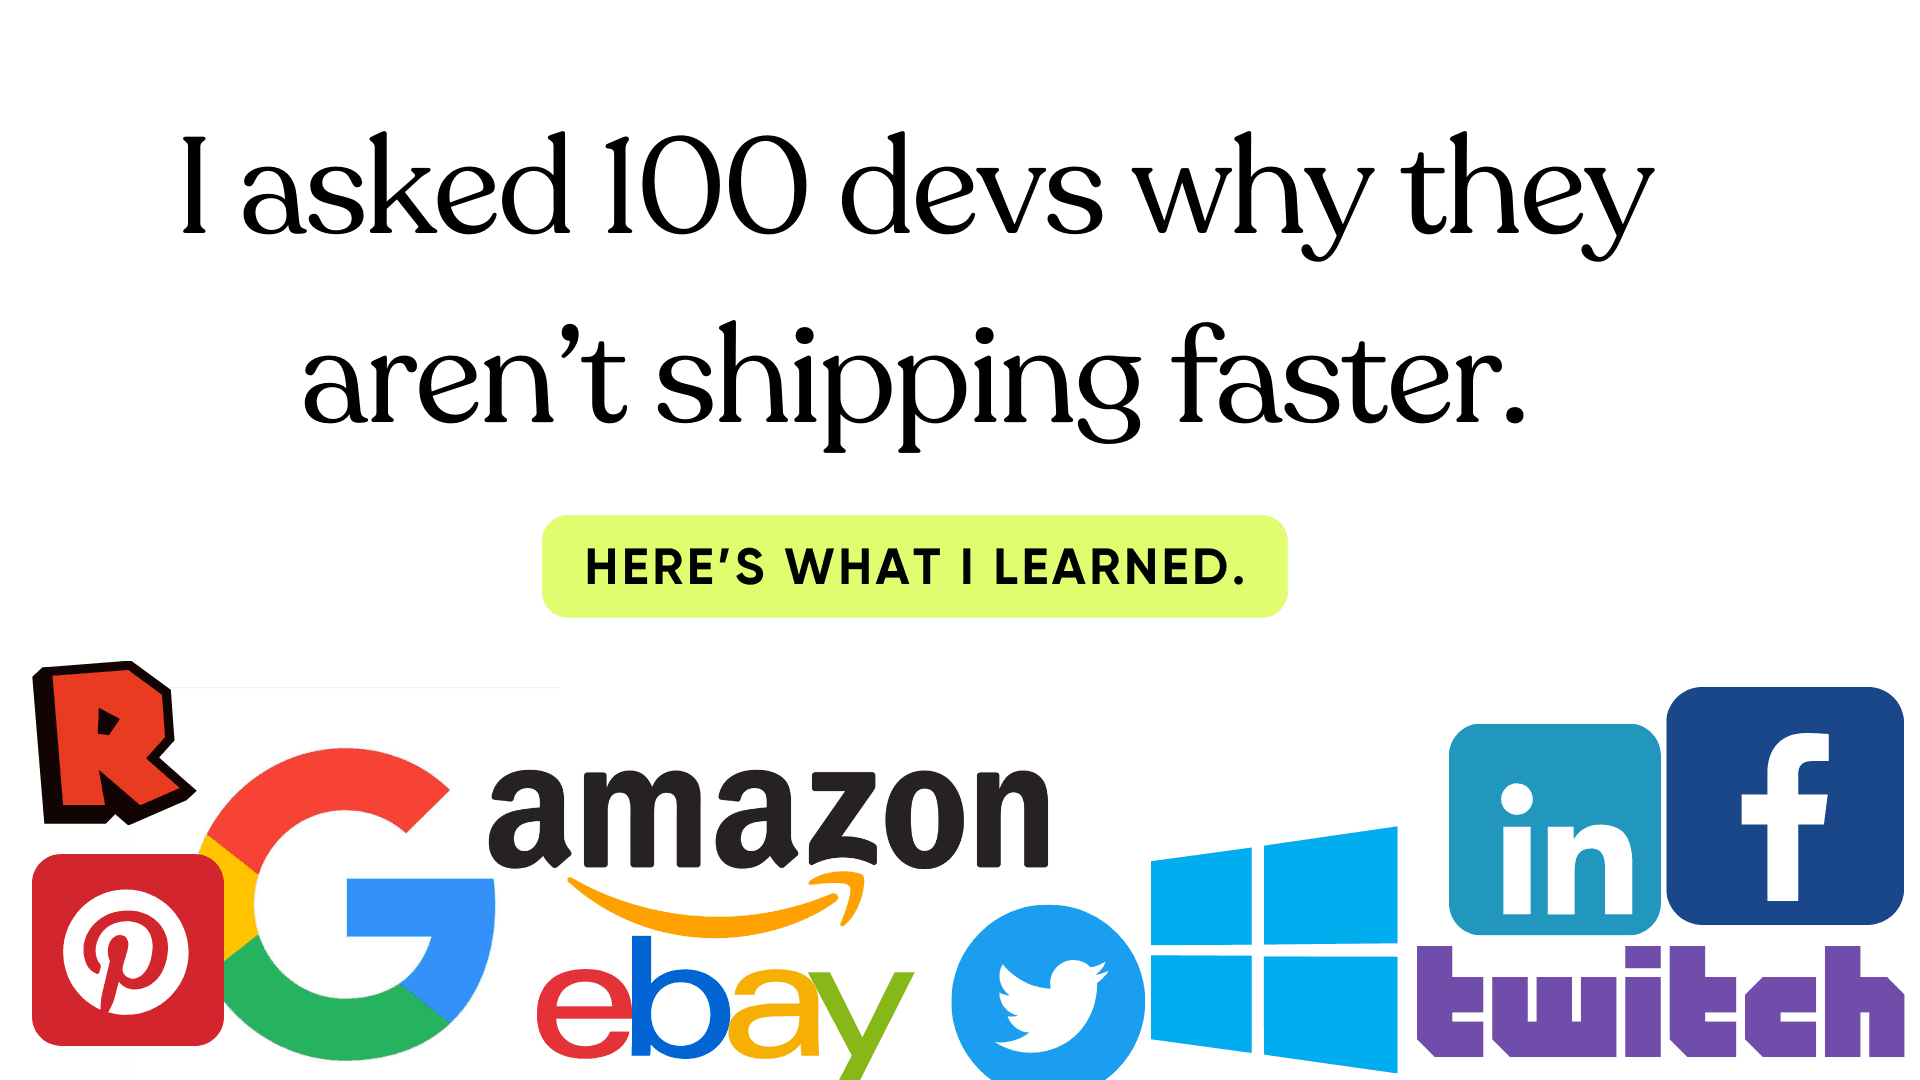 I asked 100 devs they aren't shipping faster. Here's what I learned.